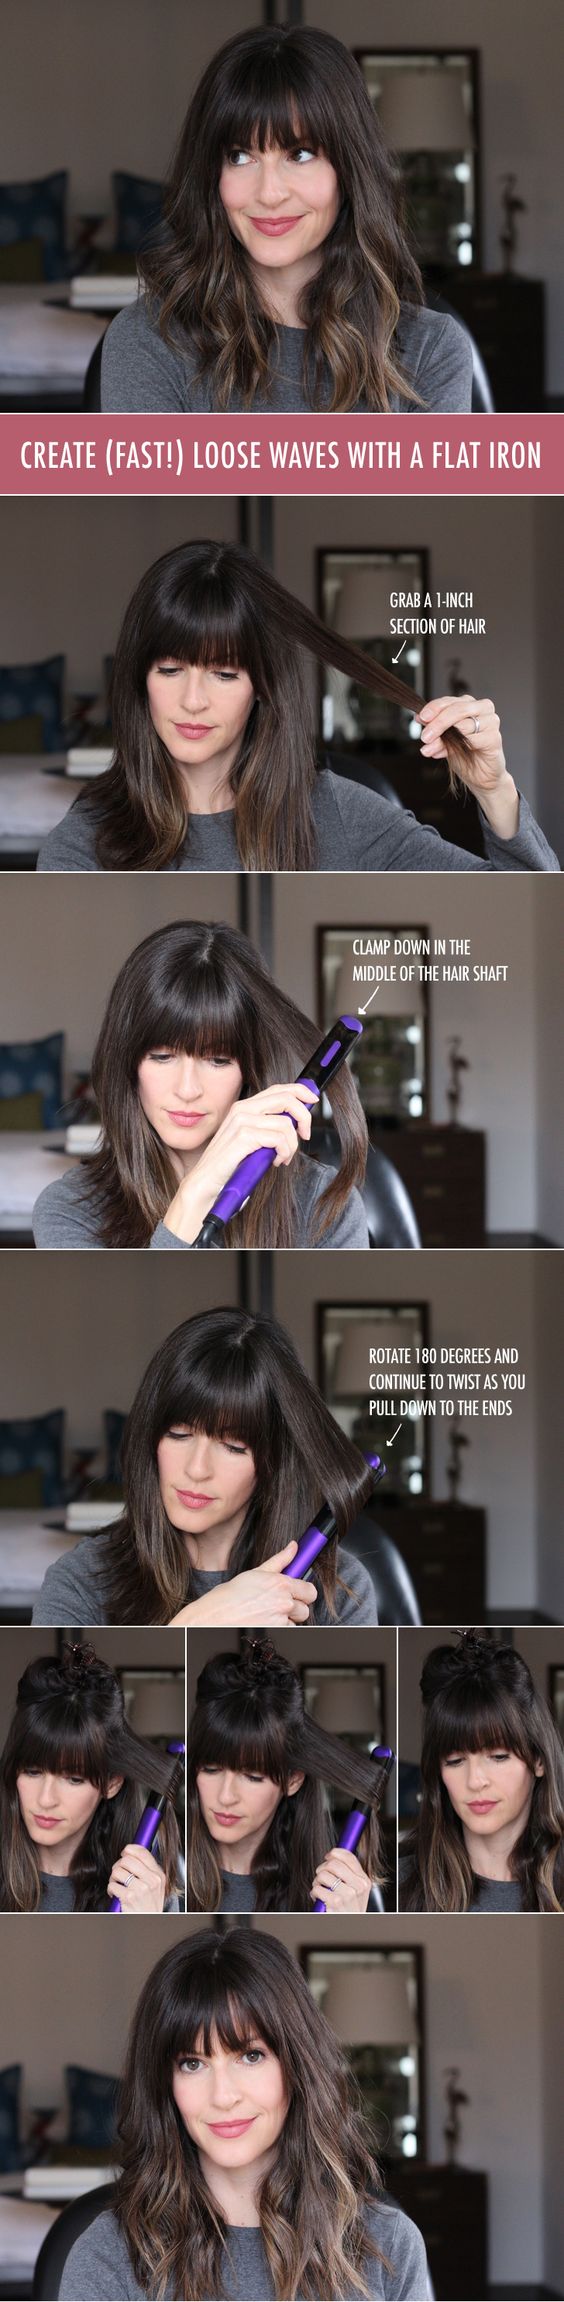 loose-waves-by-a-flat-iron via